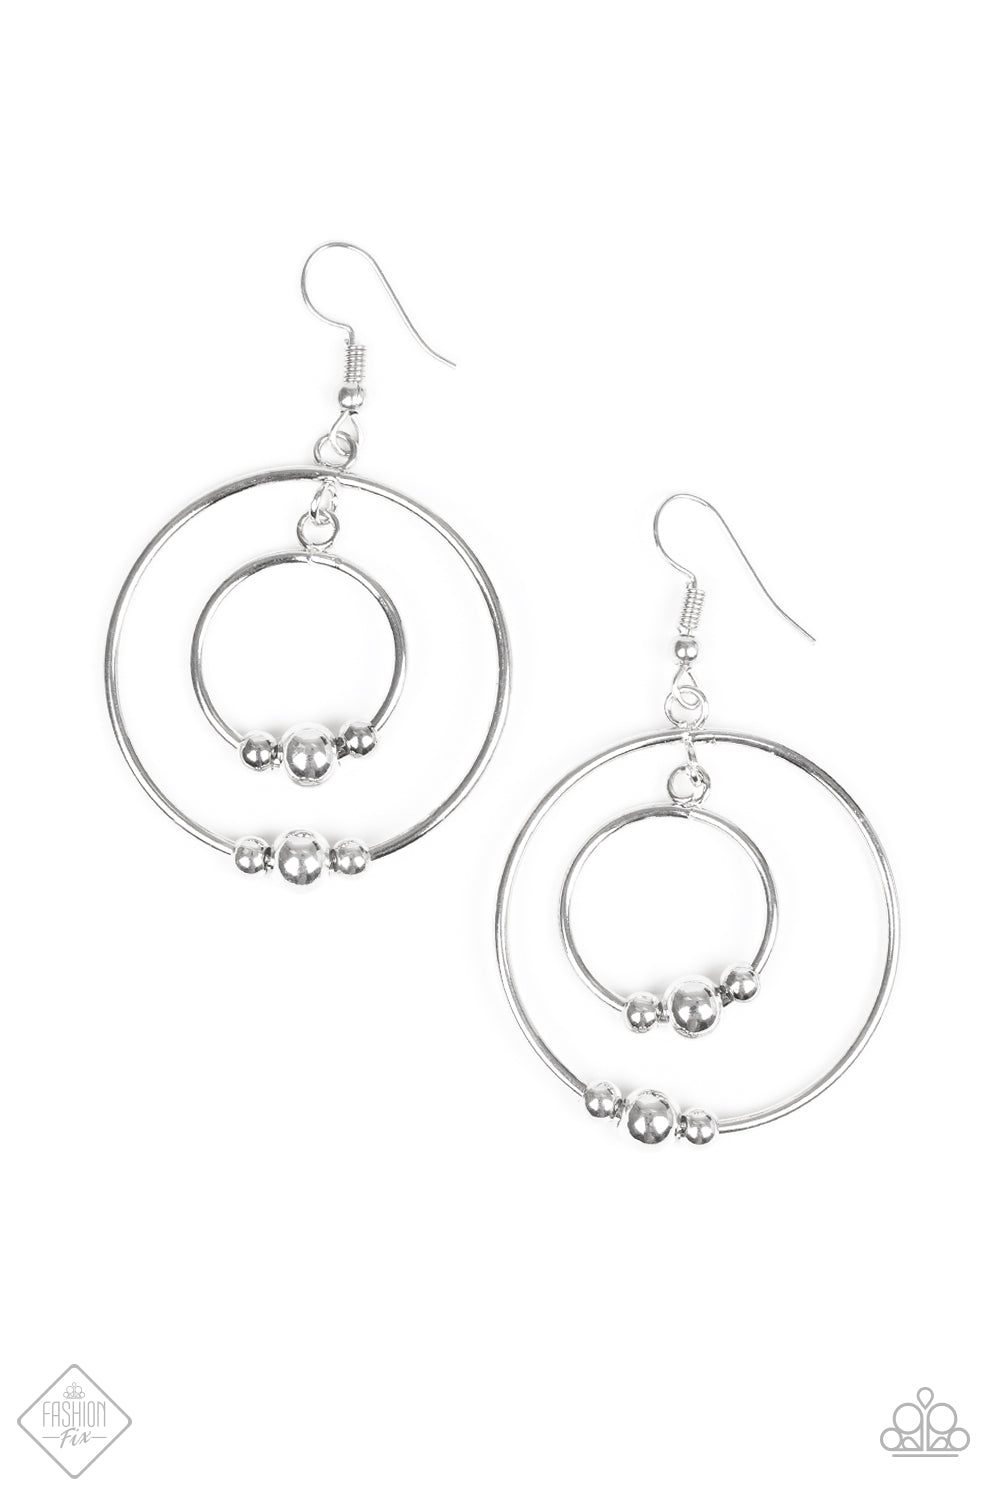 CENTER OF ATTRACTION - SILVER SLIDING BEADS FASHION FIX EARRINGS